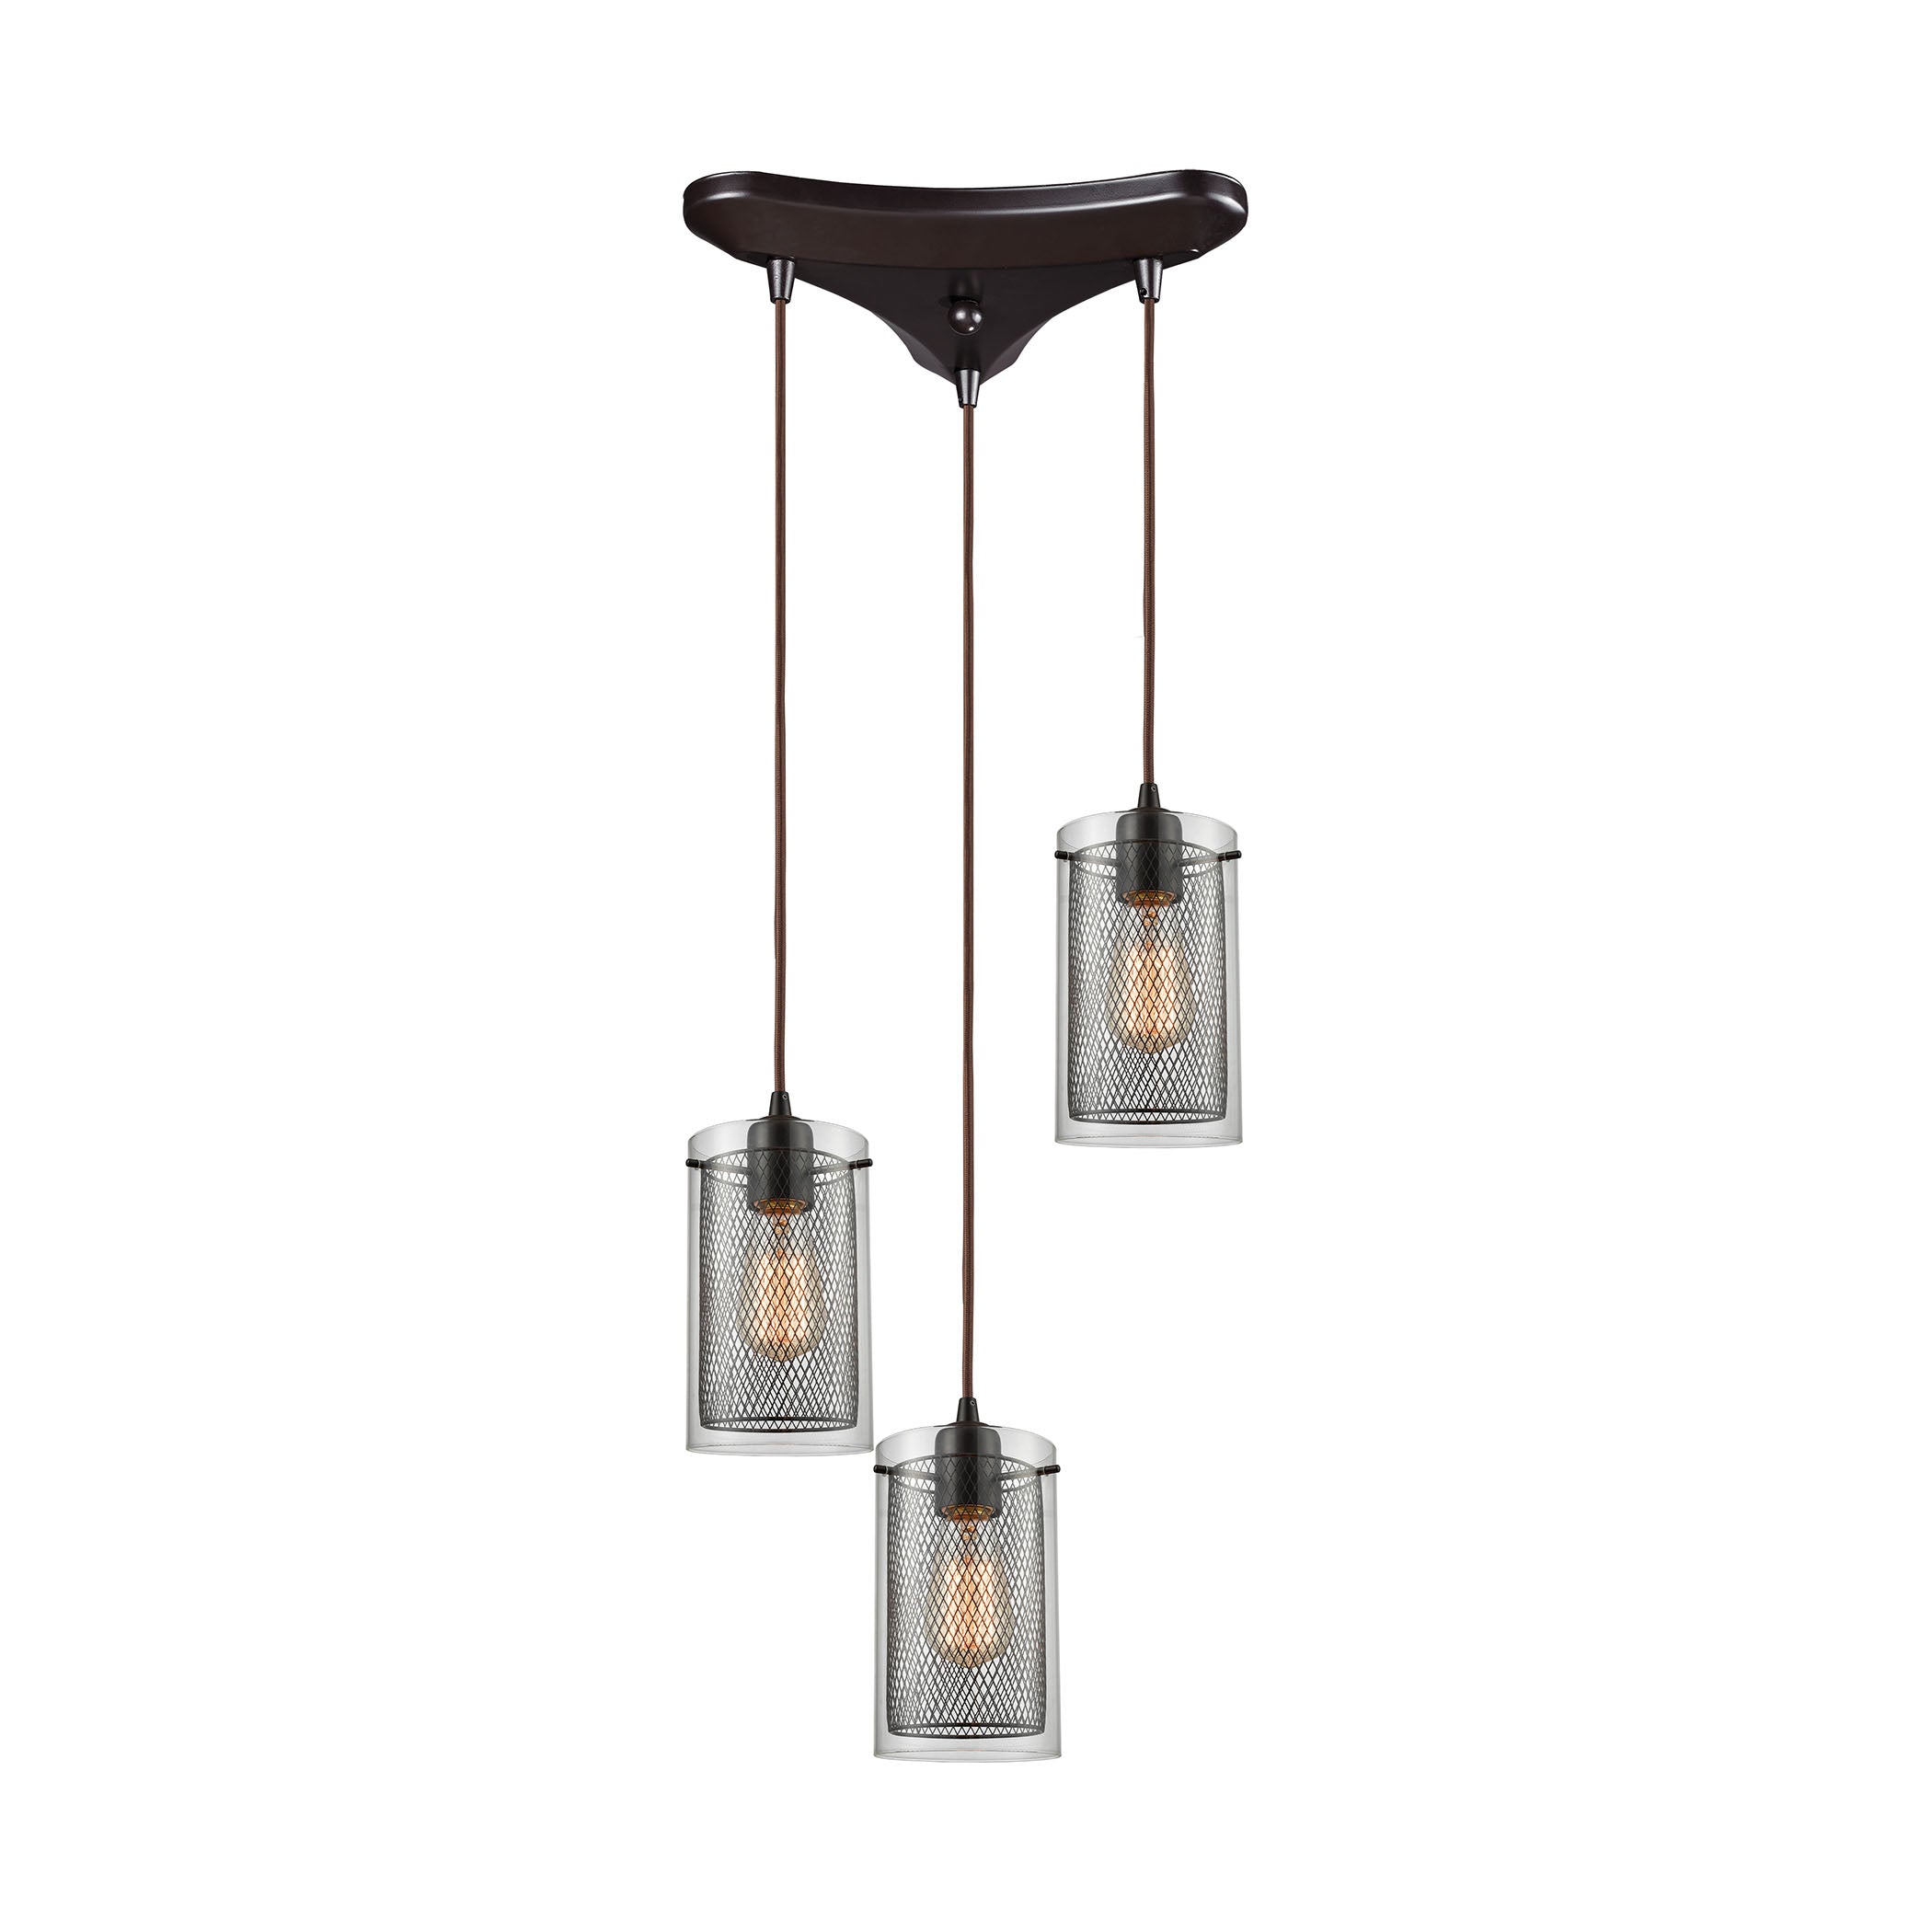 ELK Lighting 10448/3 Brant 3-Light Triangular Pendant Fixture in Oiled Bronze with Clear Glass and Metal Fishnet Shade